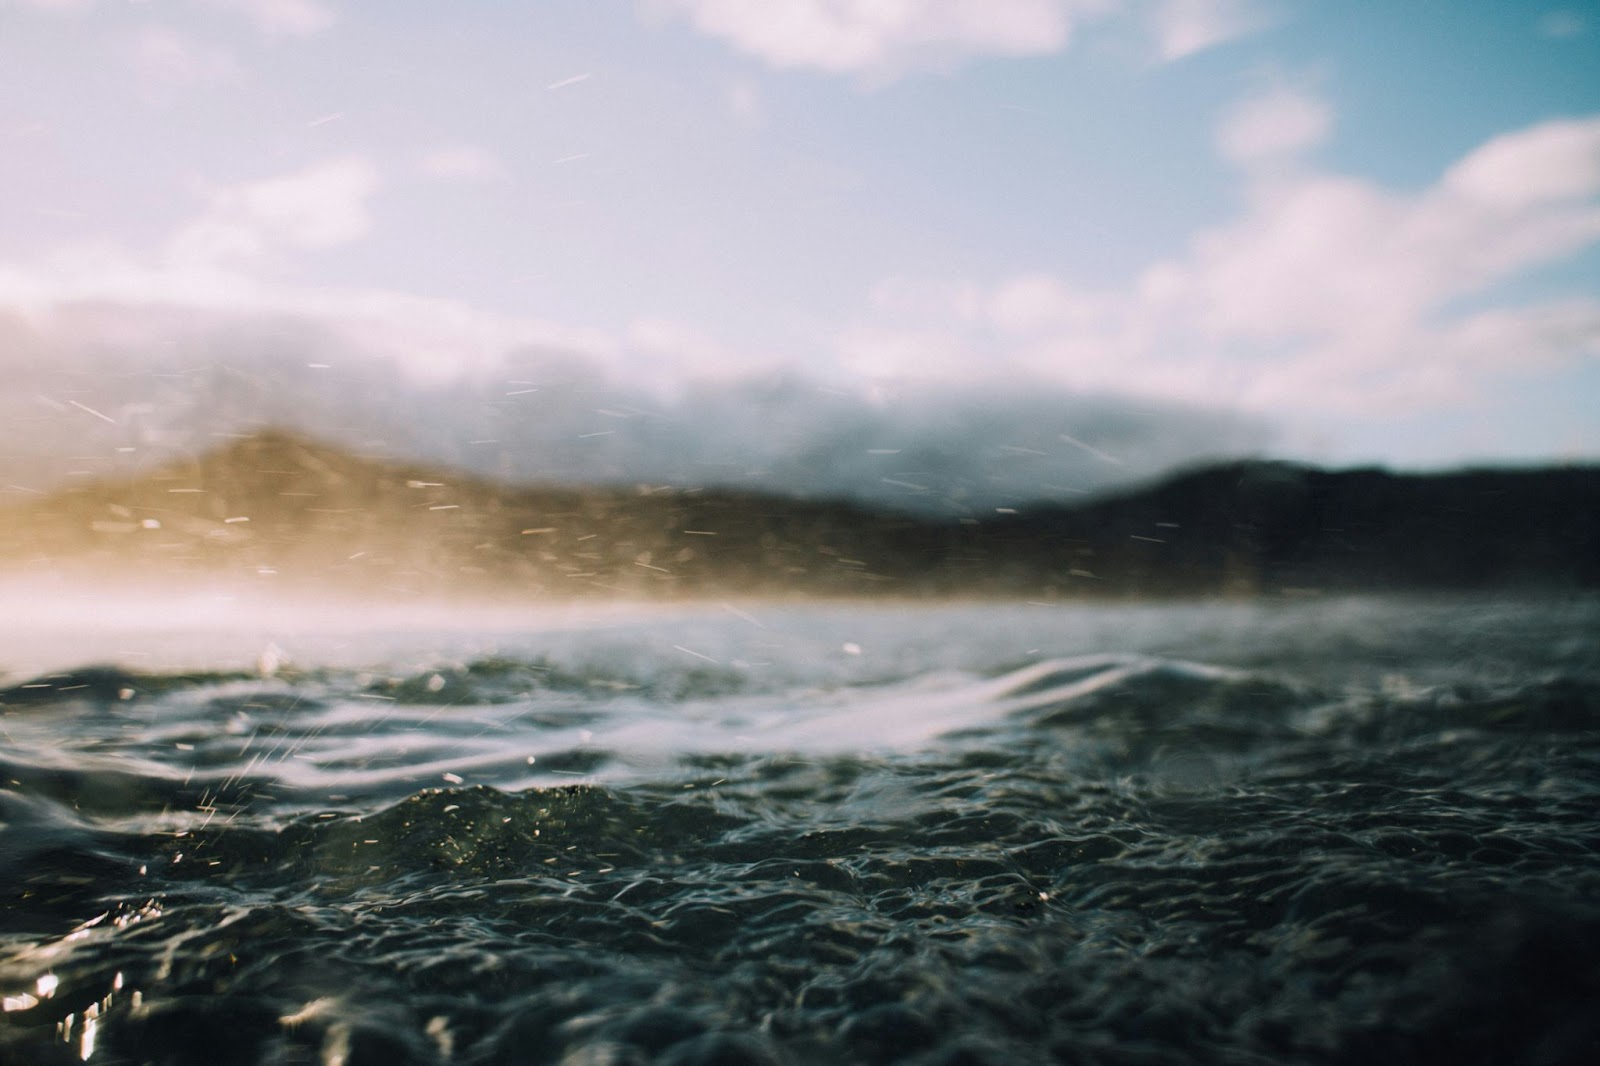 Close up picture of a lake with choppy waves and spray being kicked up by wind and out of focus mountains in the background.